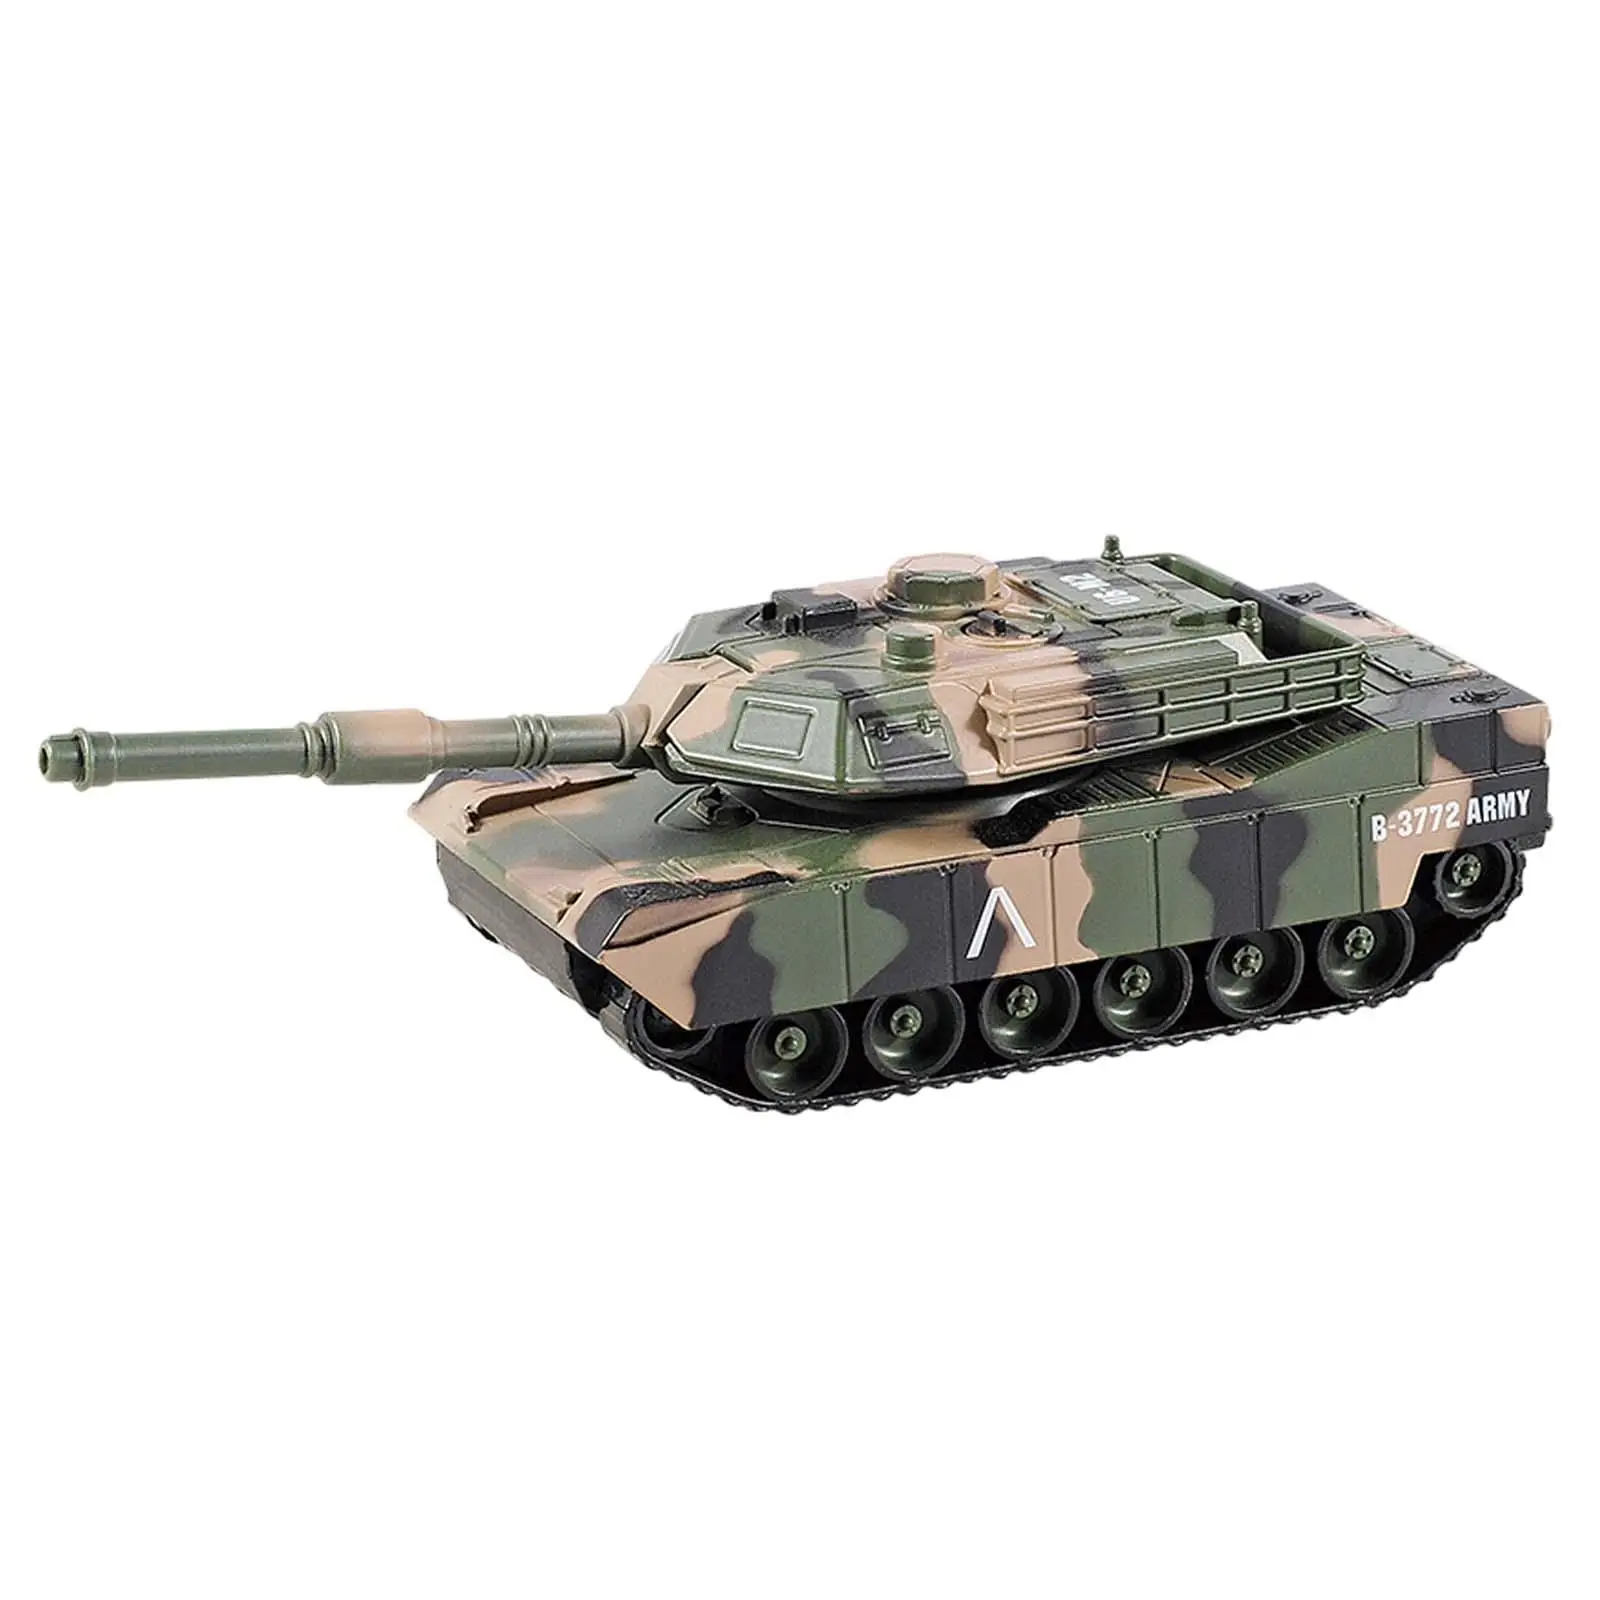 1/24 Scale Tank Toy Creative Realistic Educational Toys Vehicle Pull Back Tank Toy for Girls 3-7 Years Old Boys Kids Gift